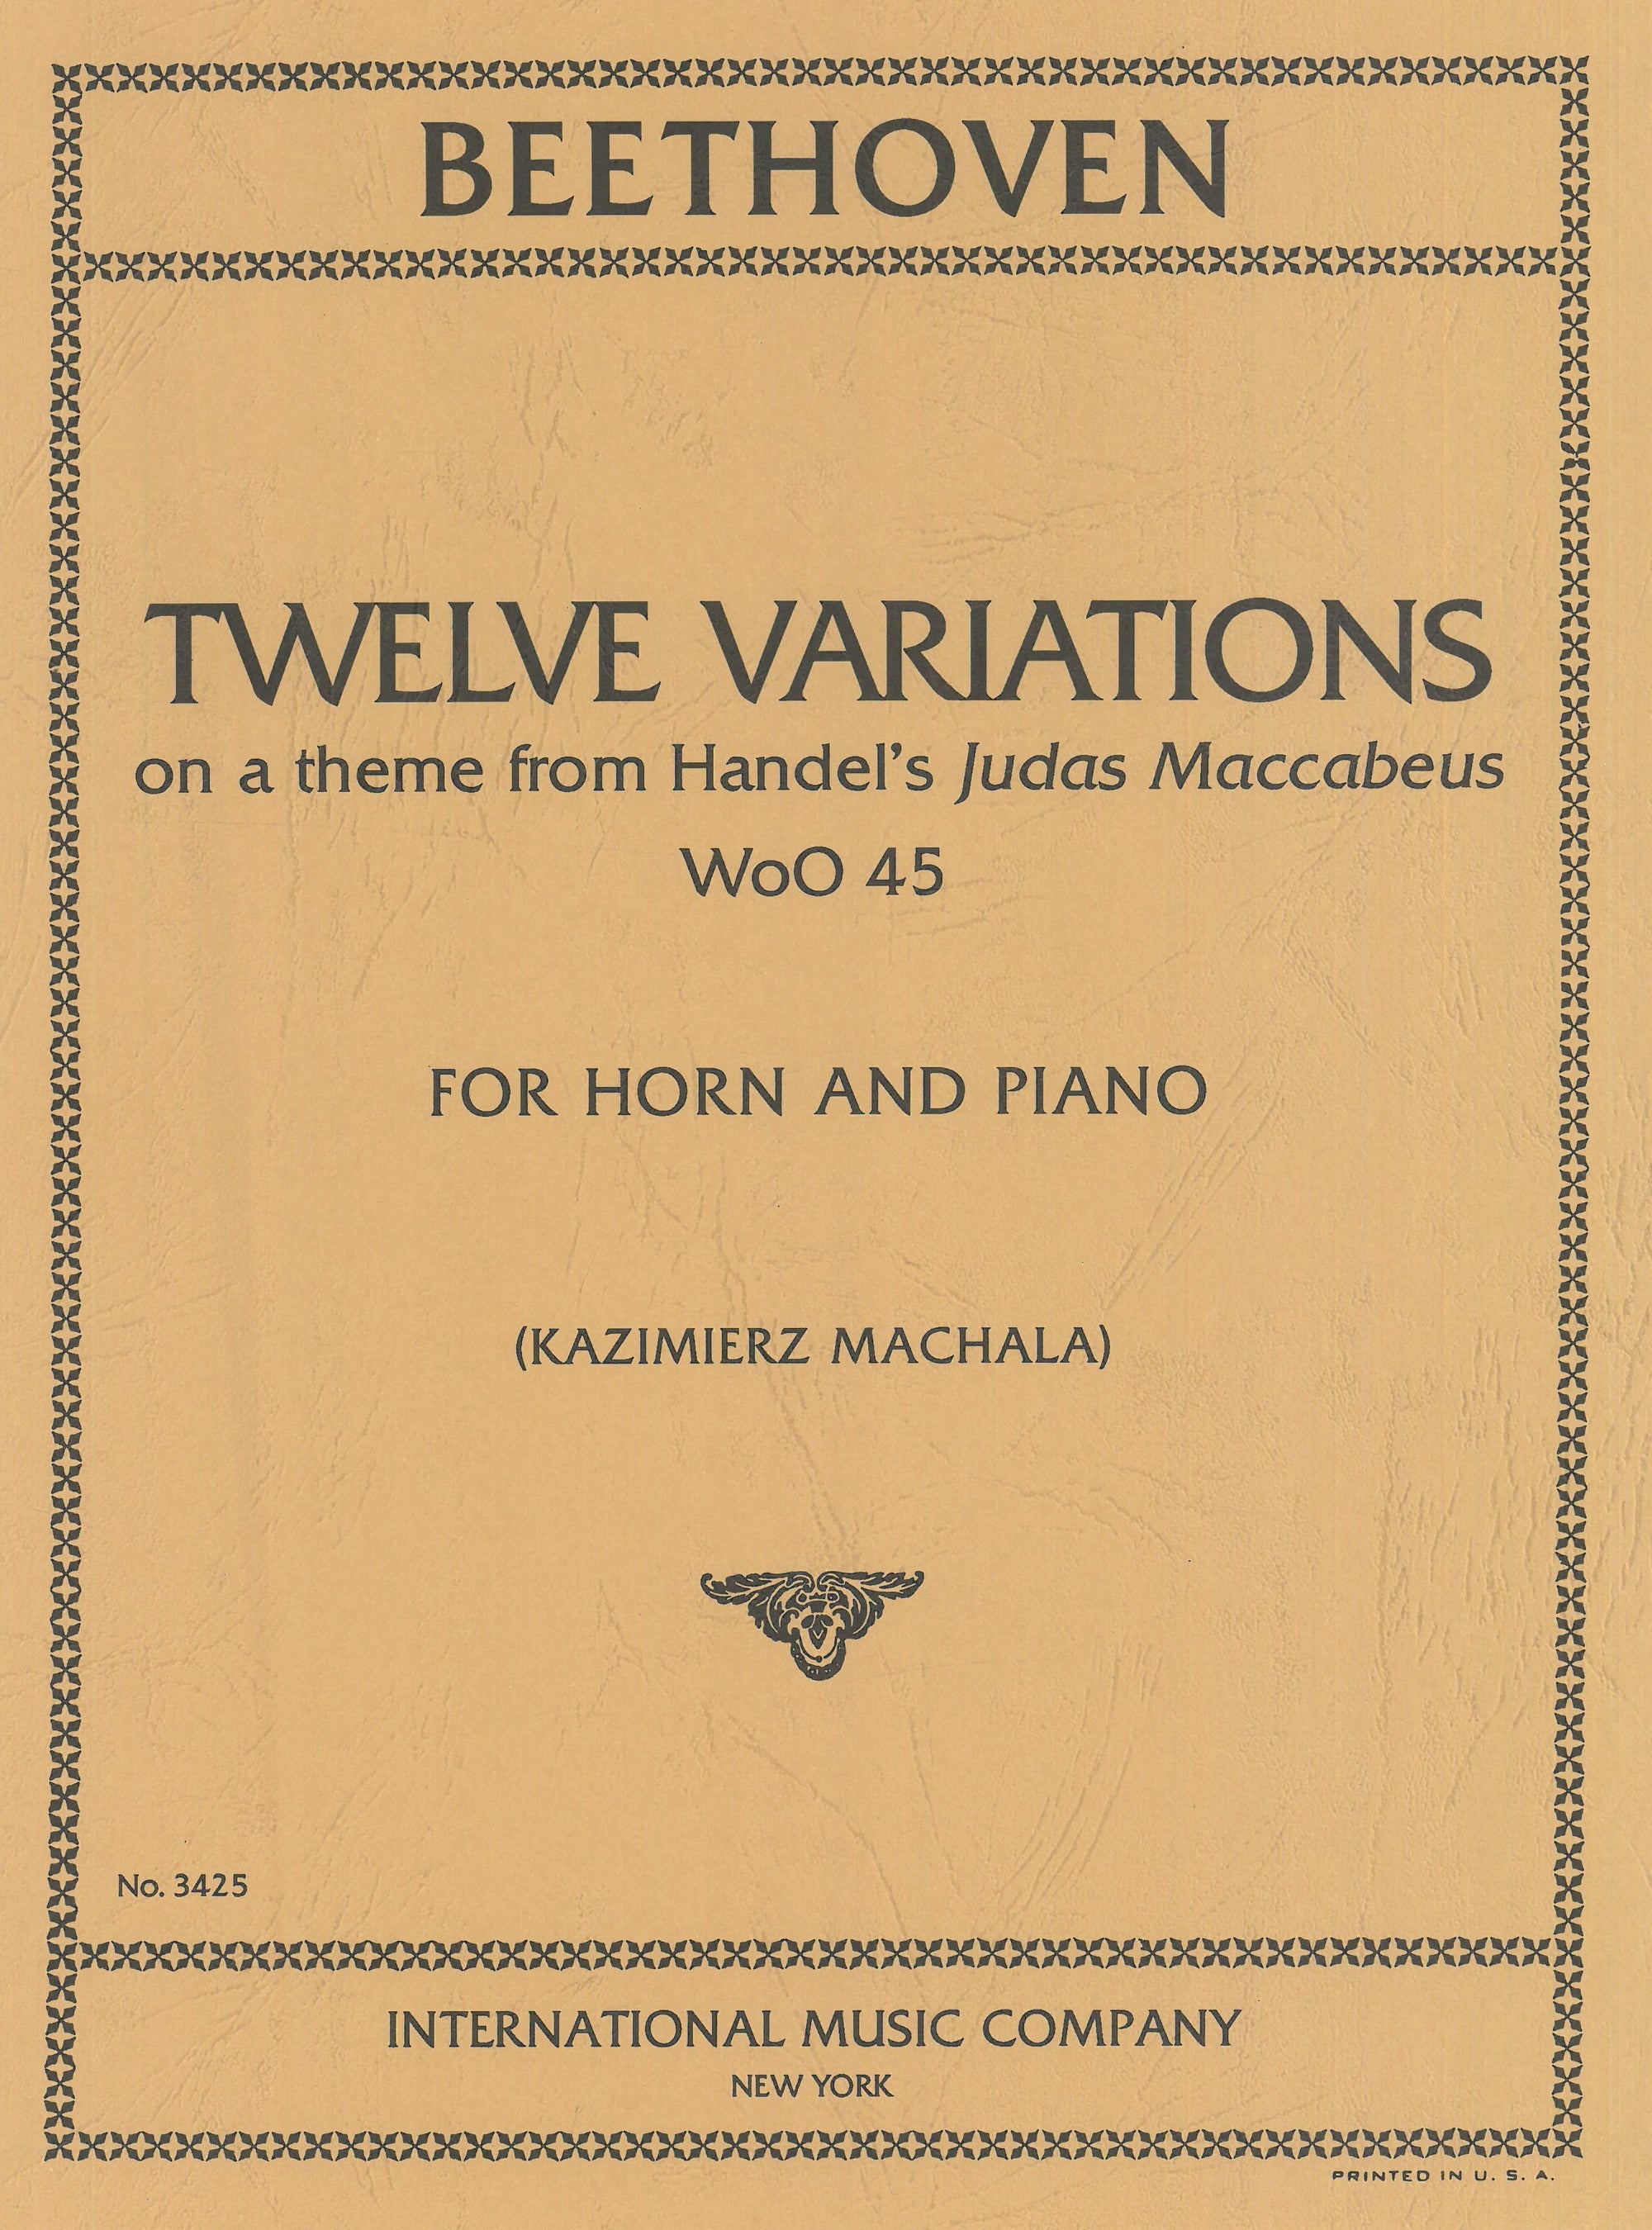 Beethoven: 12 Variations on a Theme from Handel's Judas Maccabeus, WoO 45 (arr. for horn & piano)